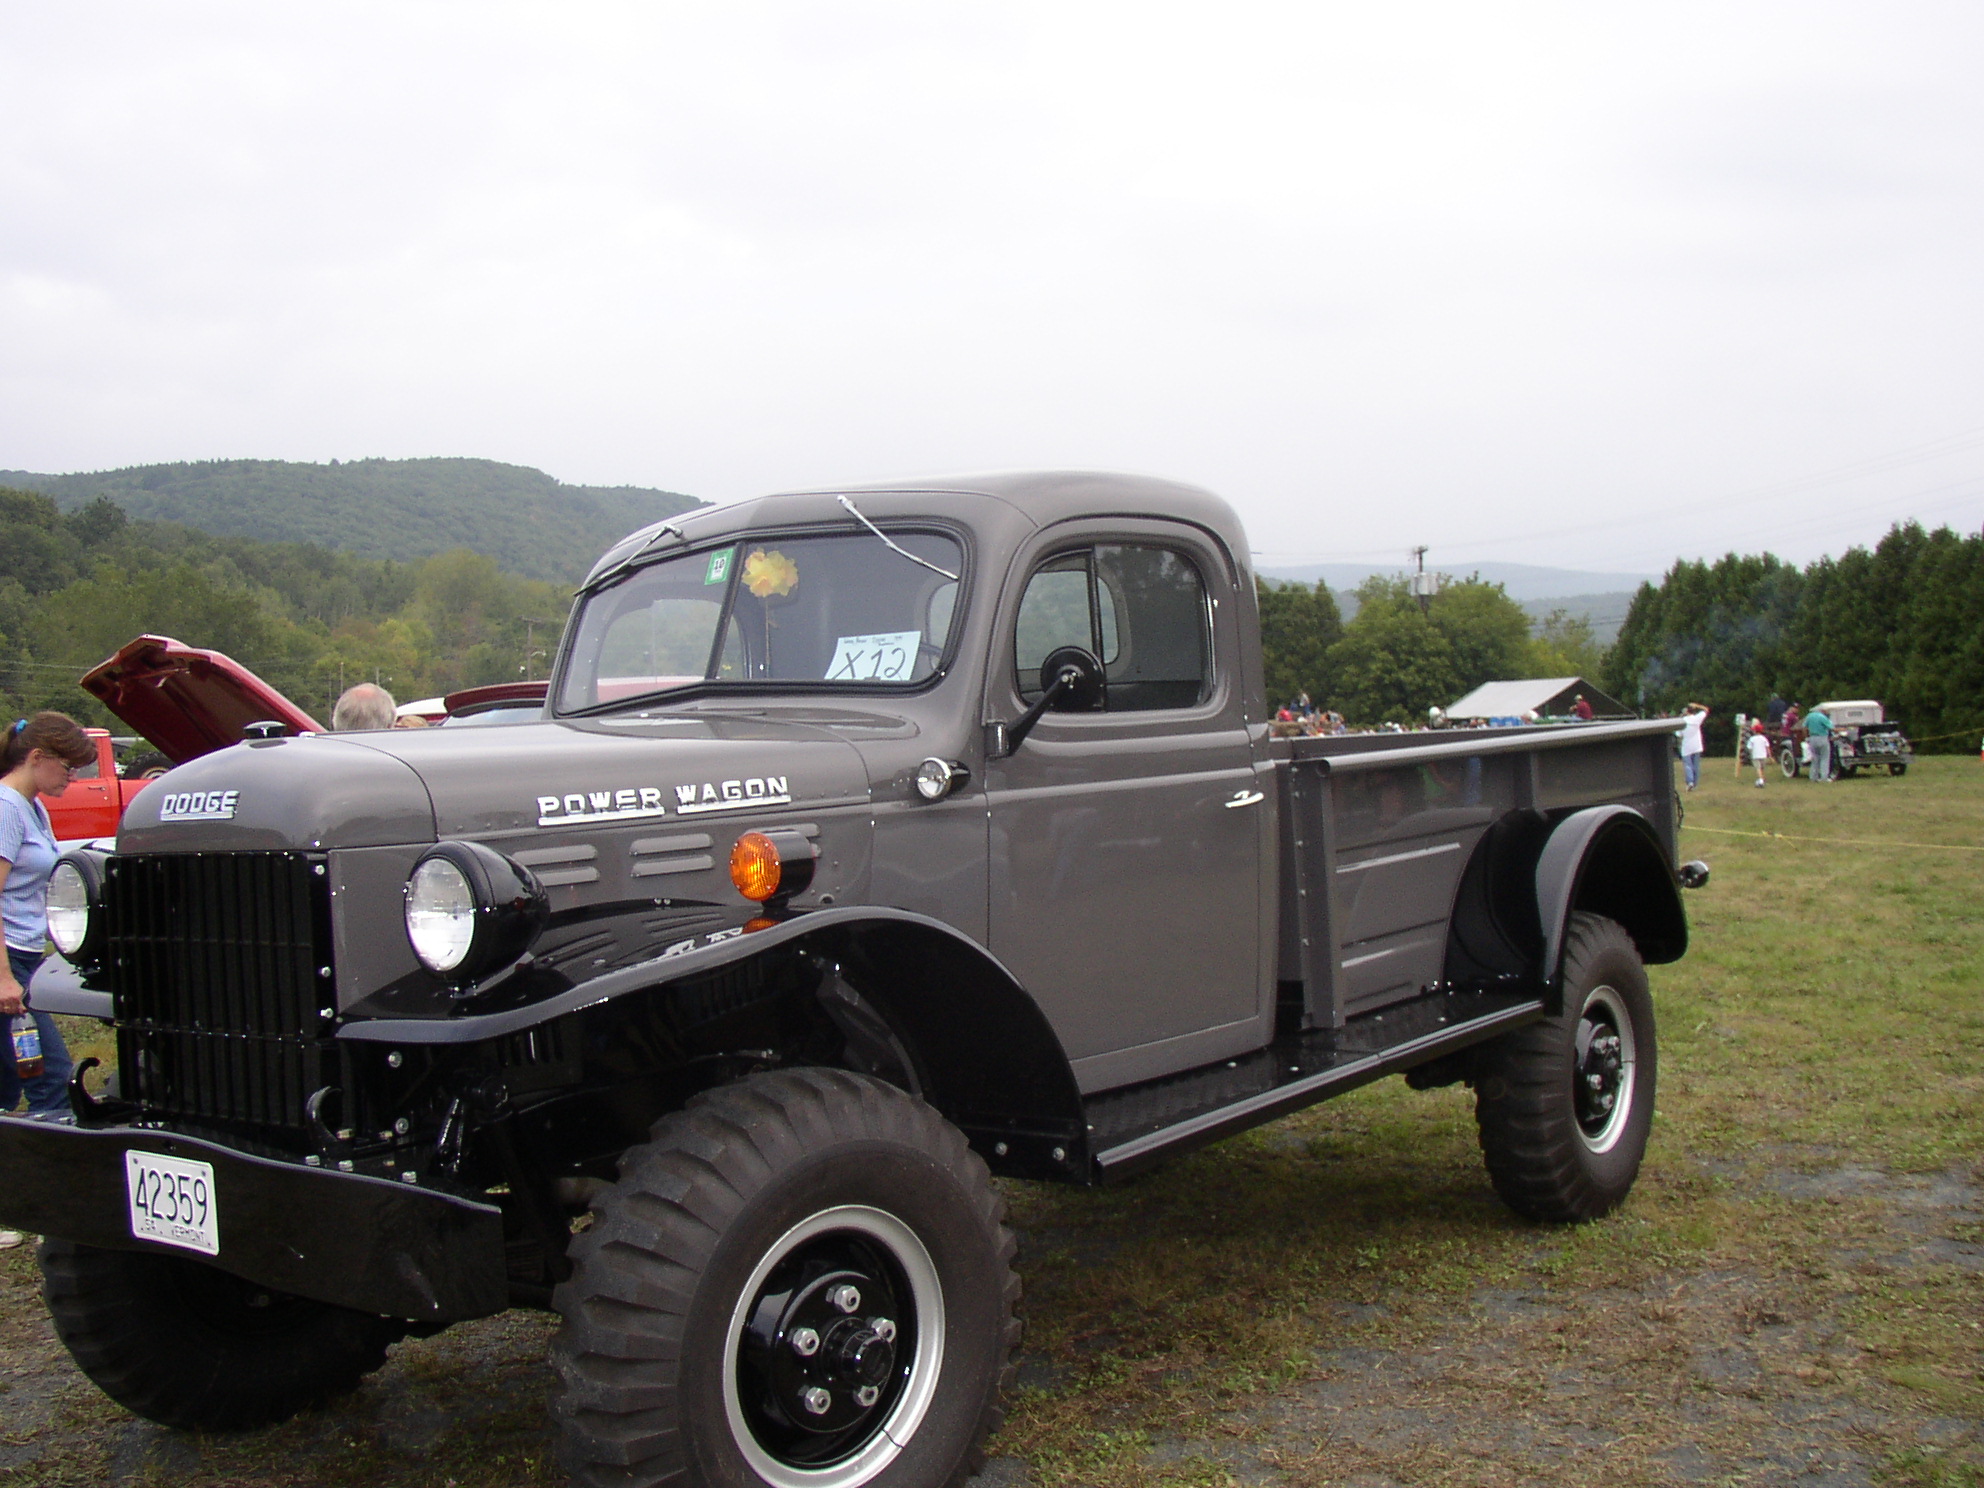 1956 Dodge Power Wagon Front Left | Flickr - Photo Sharing!